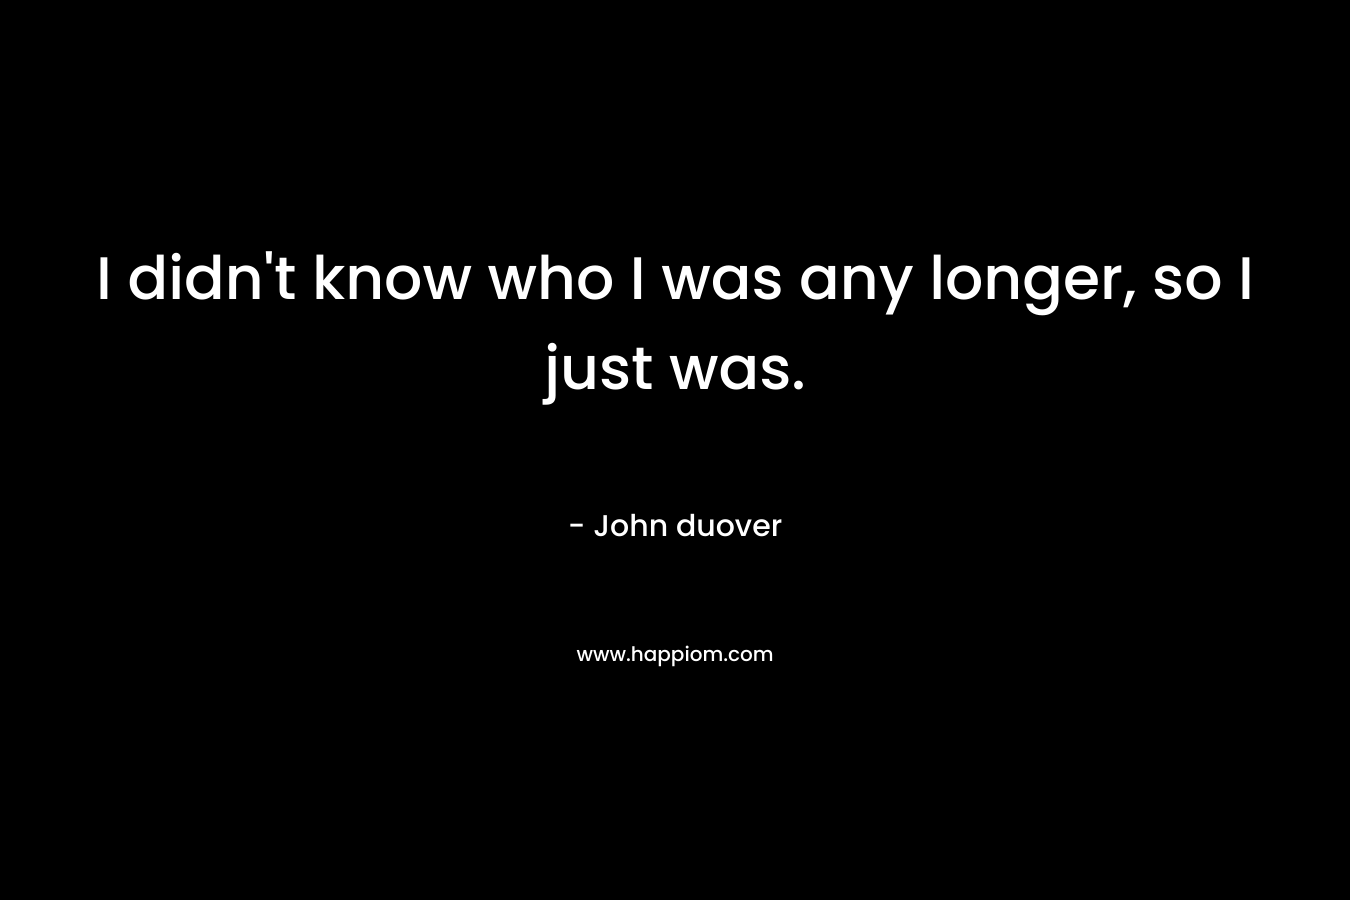 I didn’t know who I was any longer, so I just was. – John duover